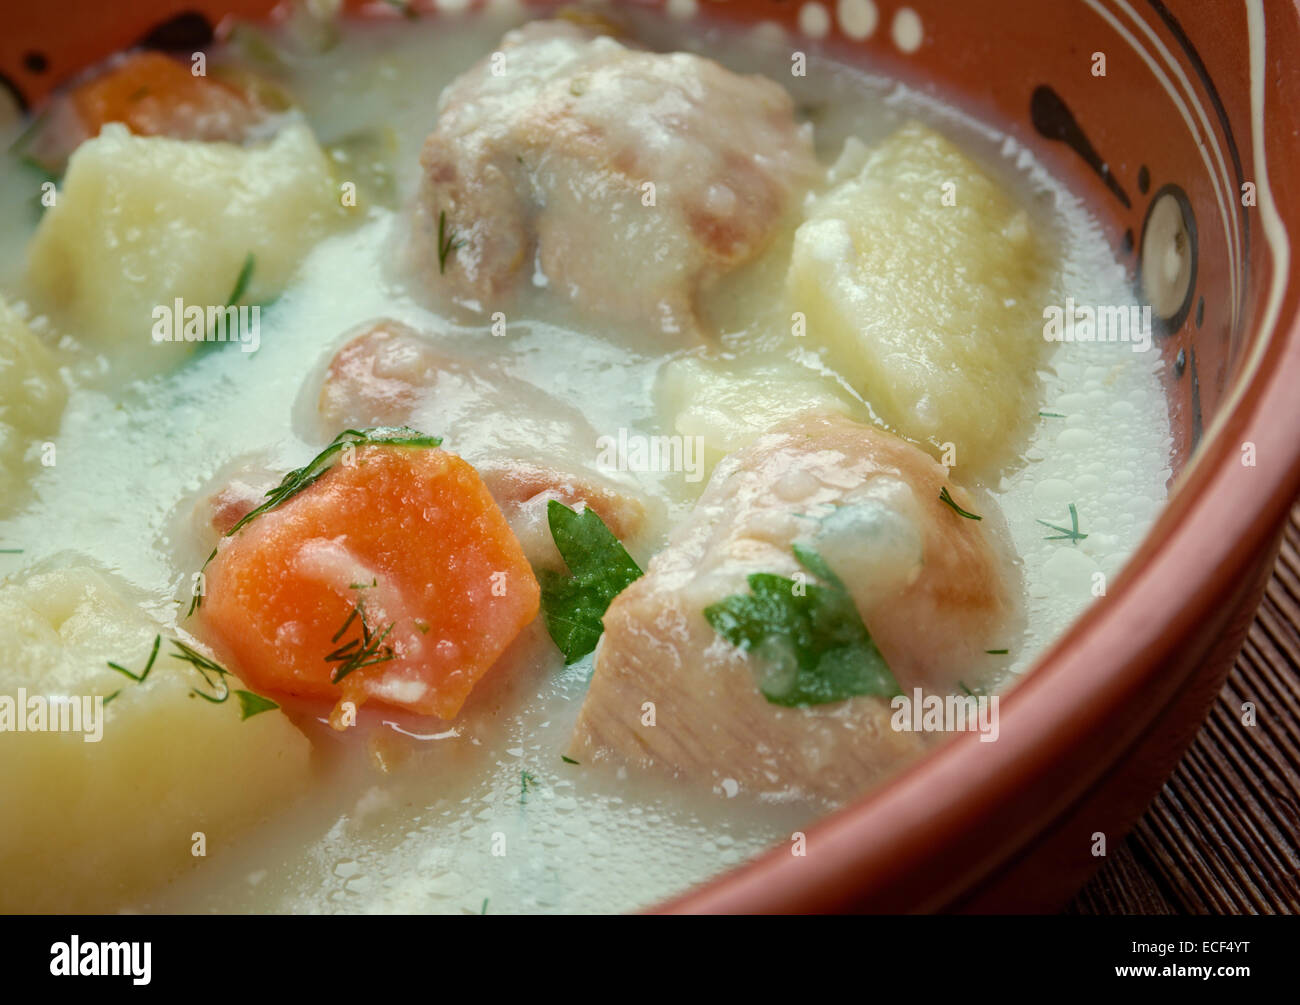 klimppisoppa - Finnish Beef and Dumpling Soup from Finland Stock Photo